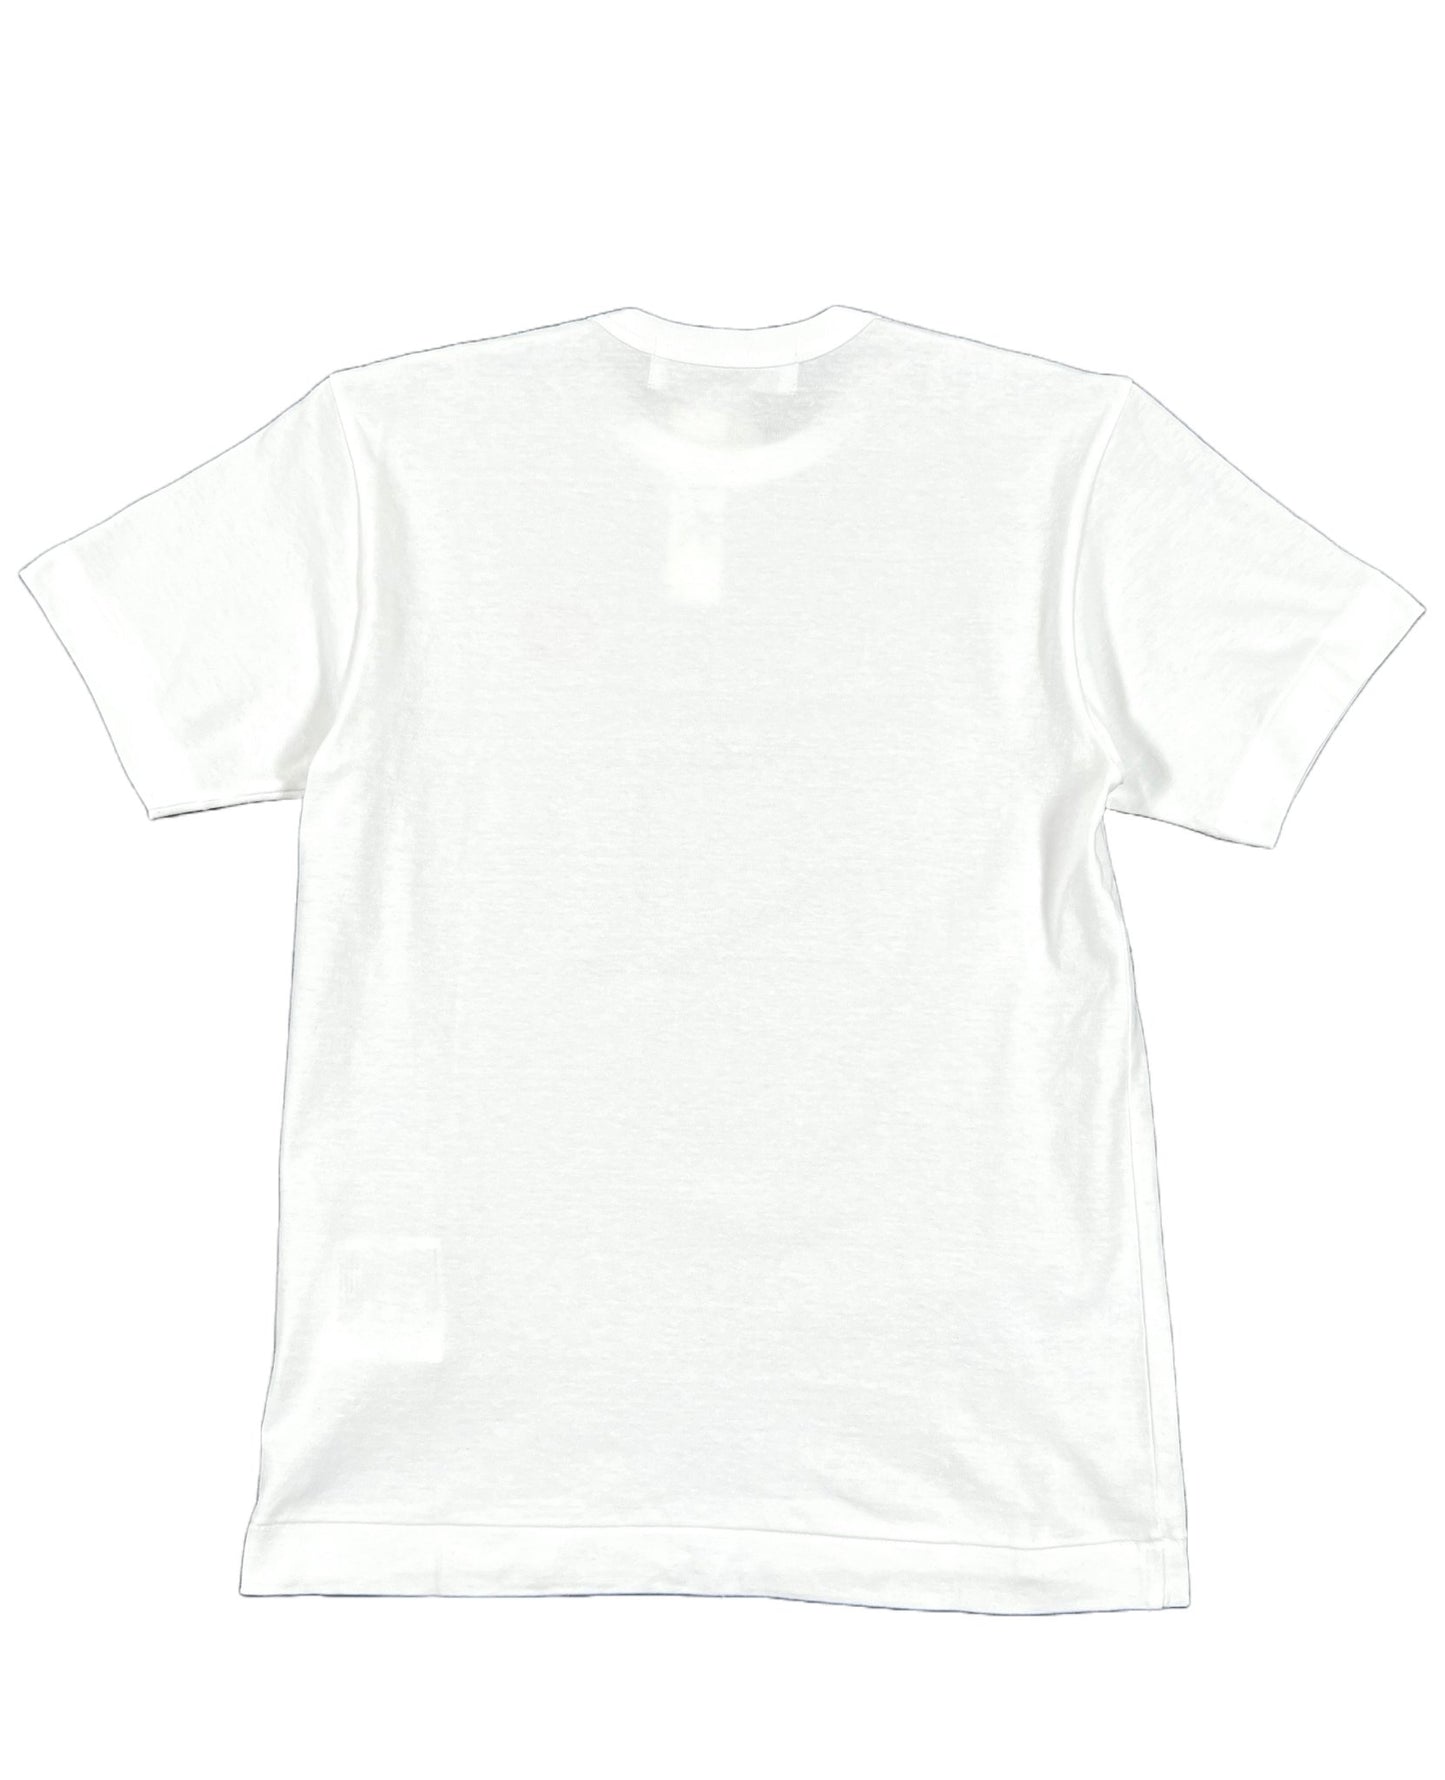 Probus DSQUARED2 S71GD1058 COOL TEE WHITE S